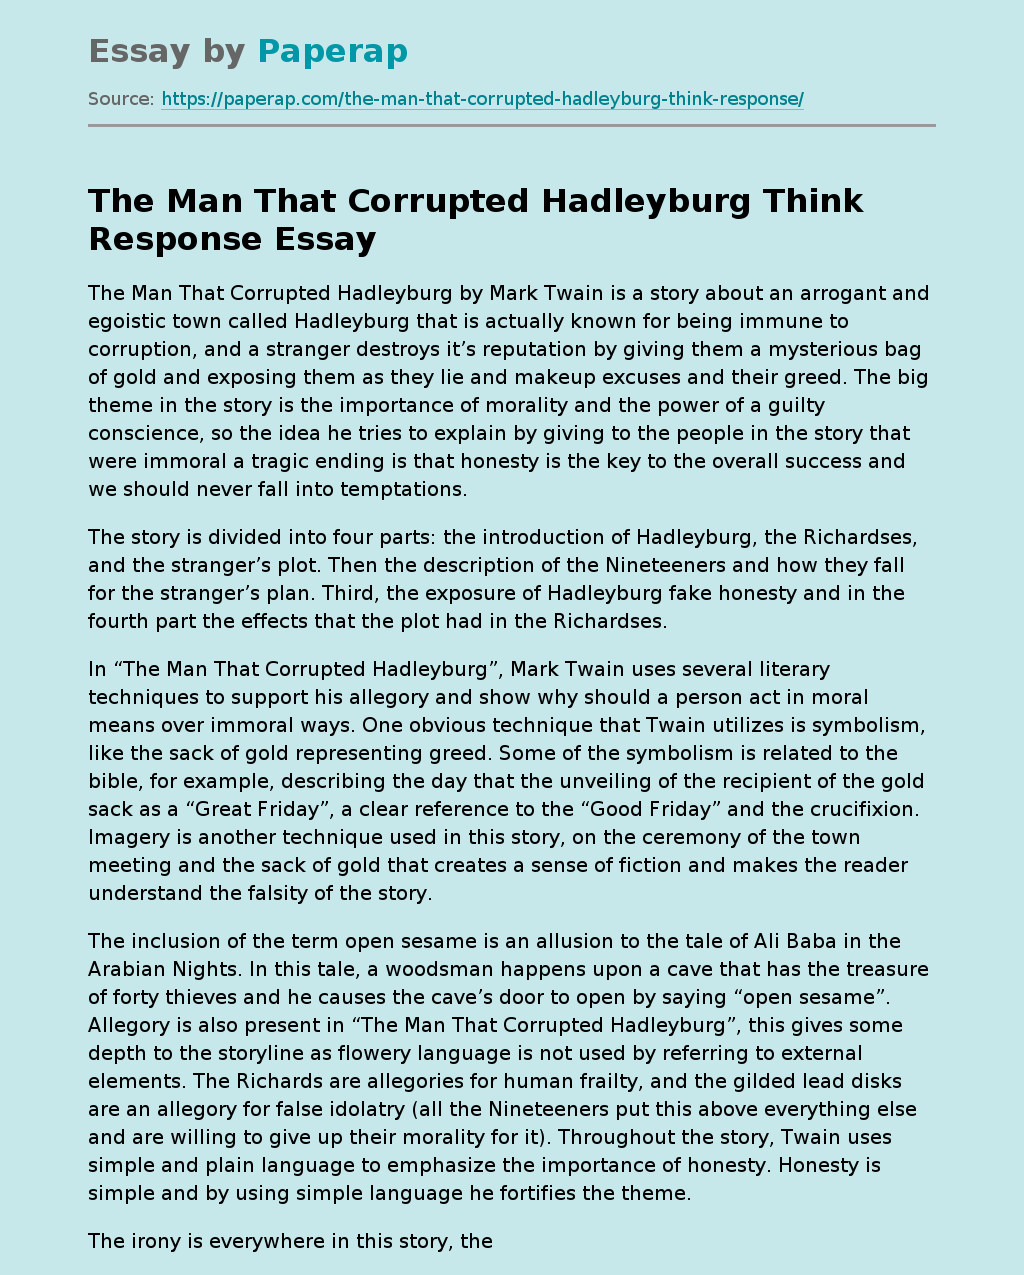 The Man That Corrupted Hadleyburg Think Response